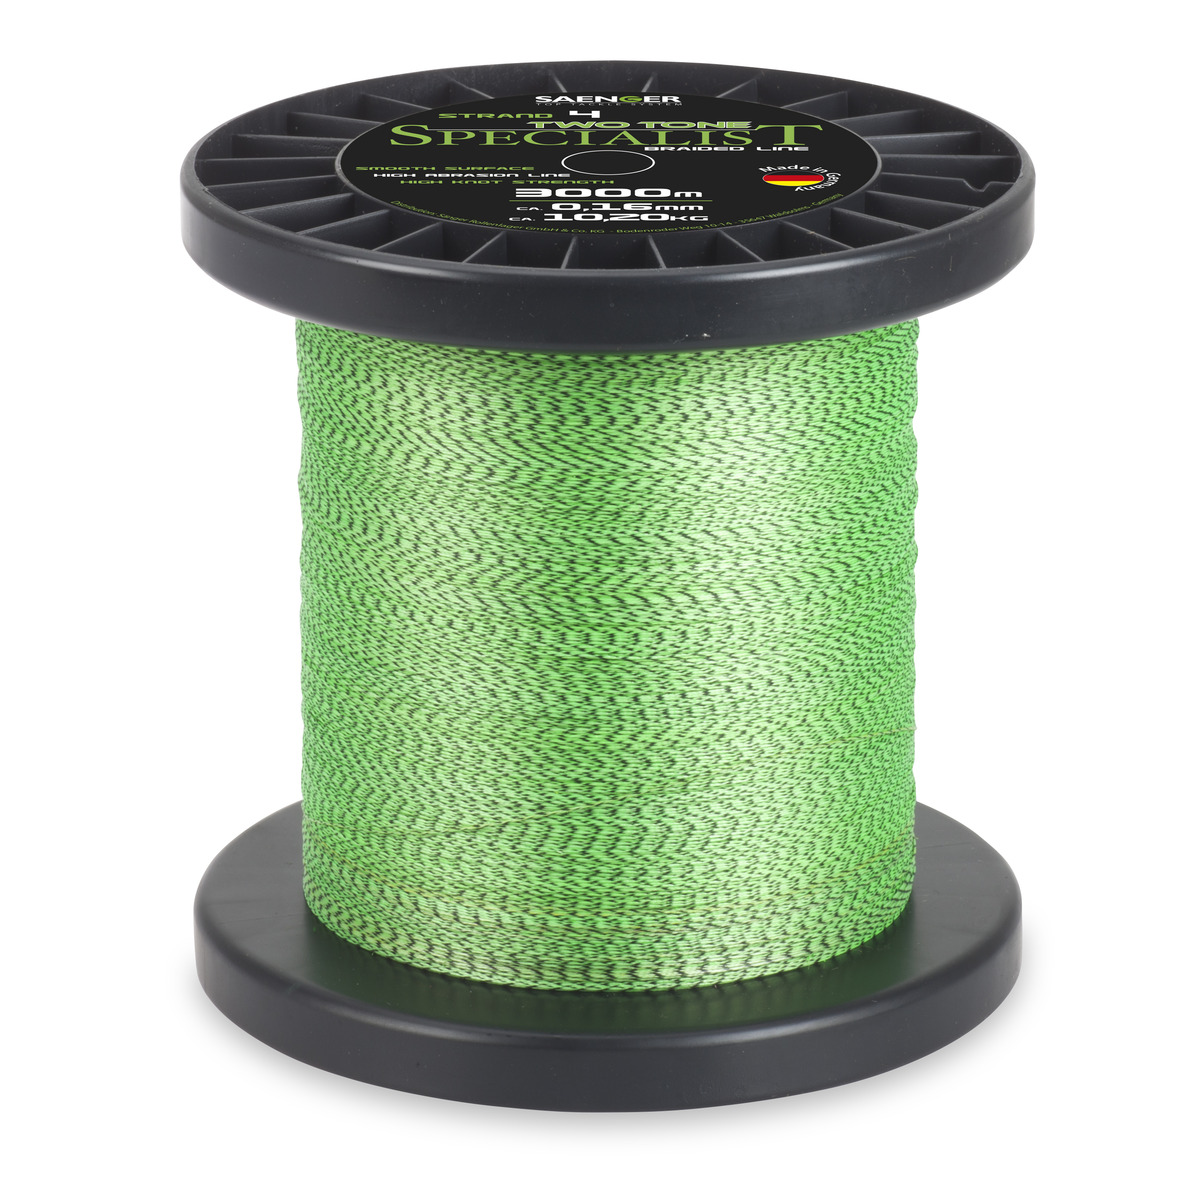 Saenger Specialist Two Tone Fluo Braid - 0,40 mm - 29,3kg 3000 m